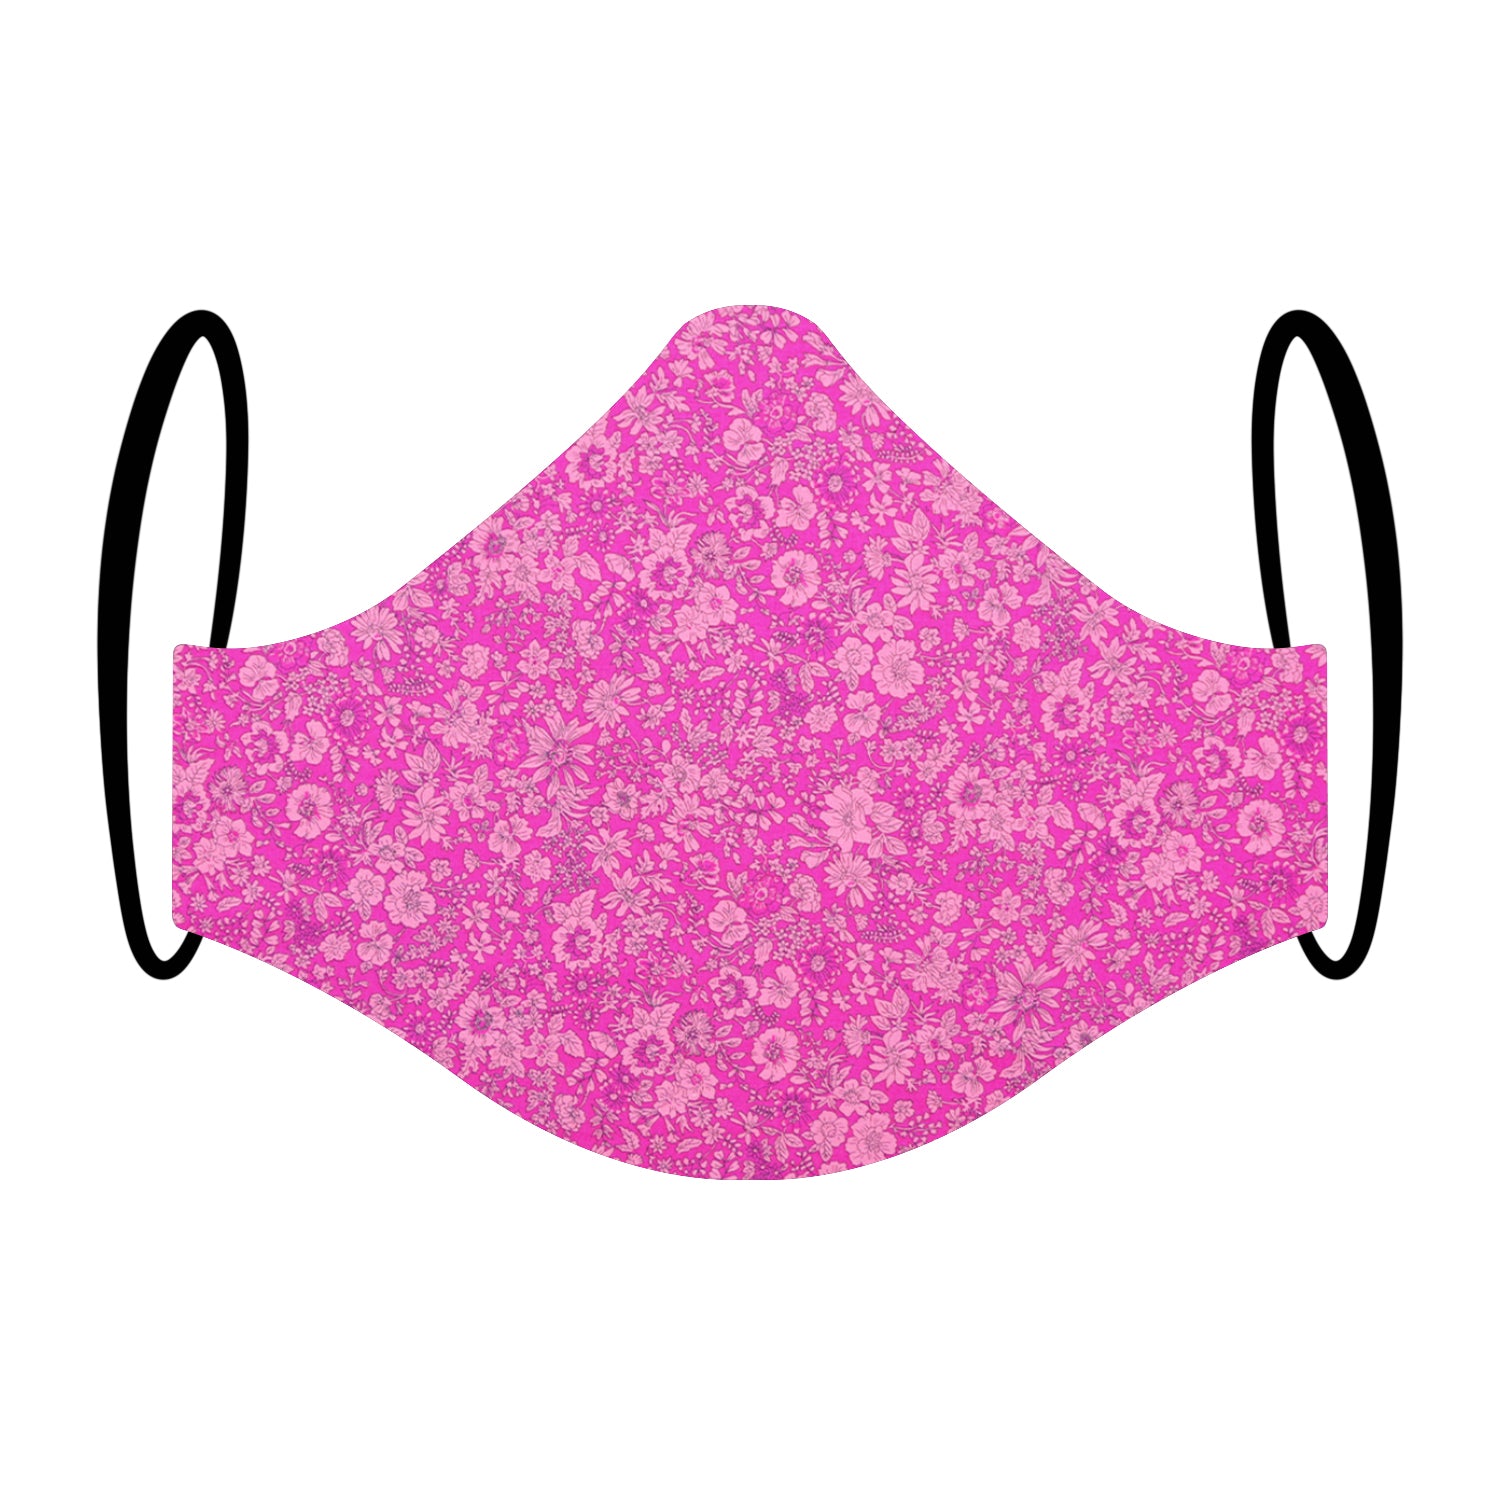 "Pink Poetry" Floral Face Mask featuring Liberty London Fabric Triple-layer Washable {Limited Edition}